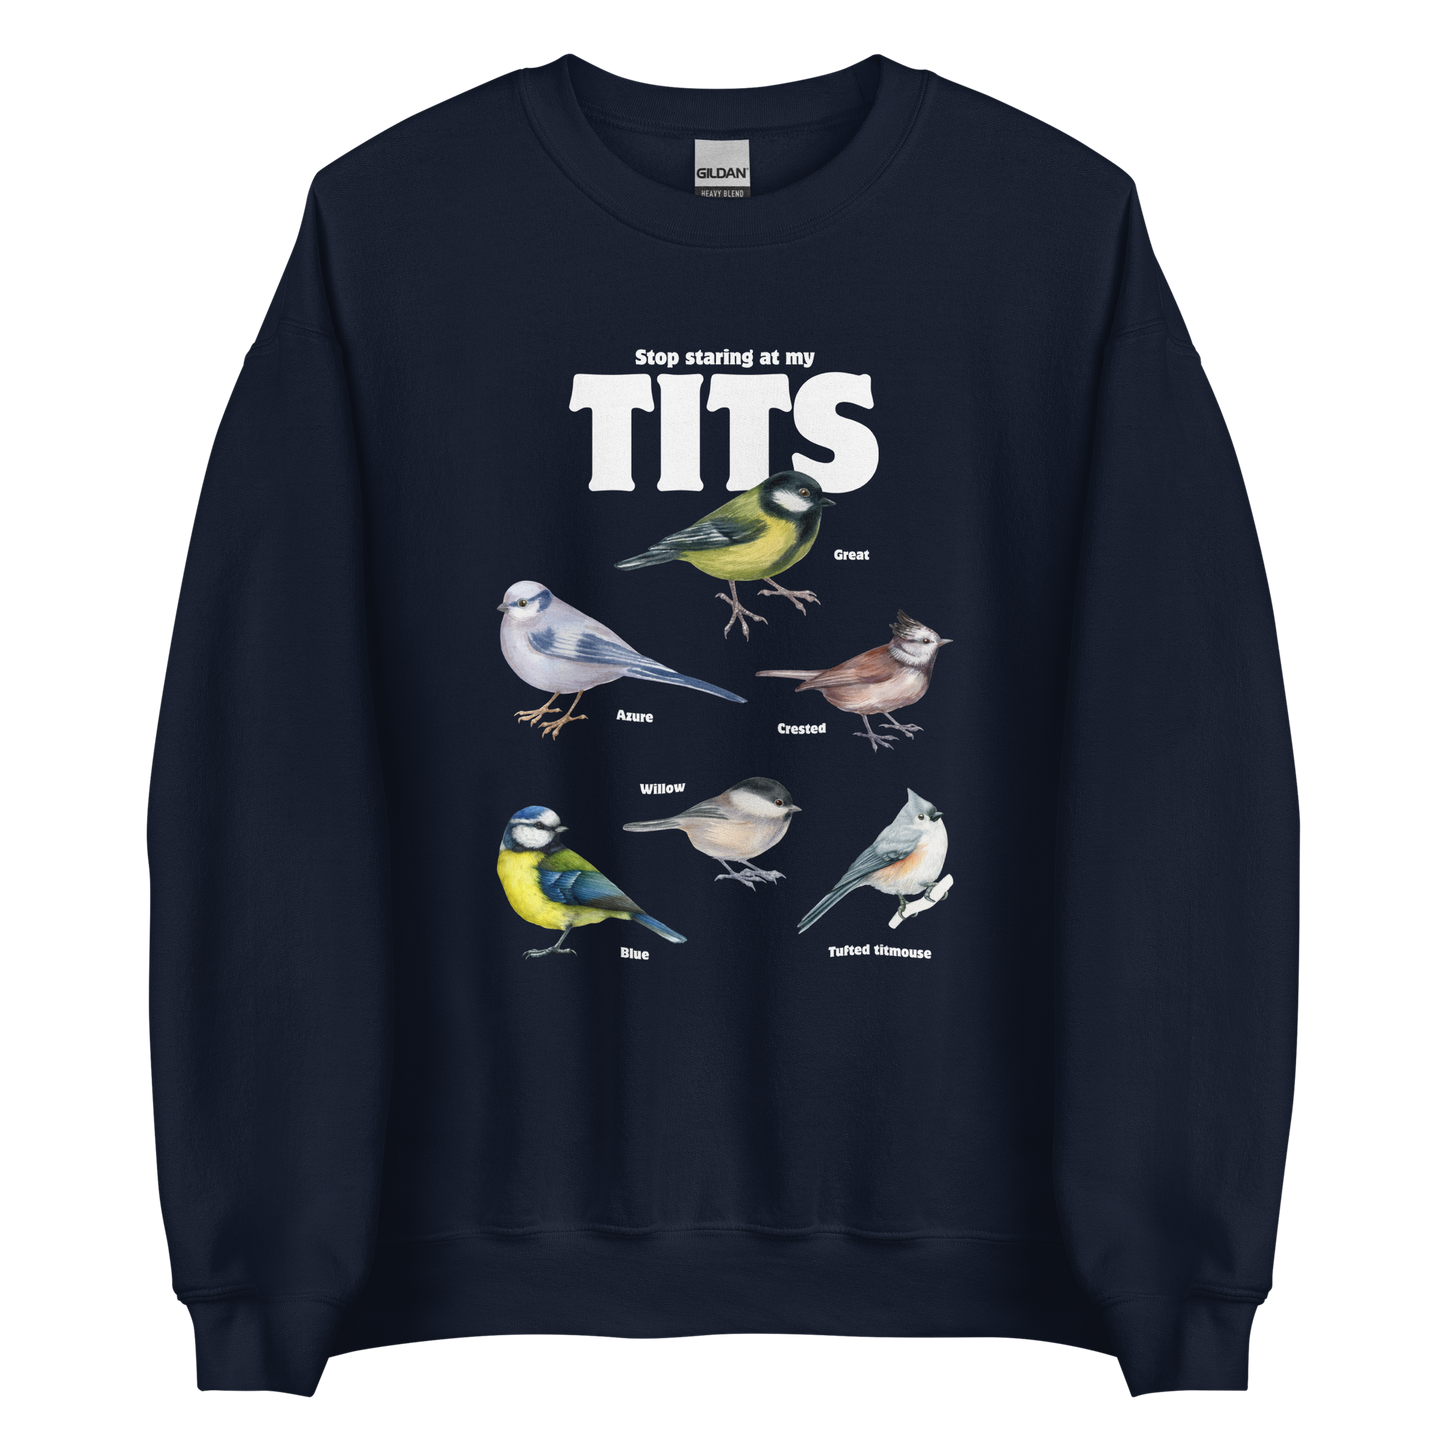 Navy Tit Sweatshirt featuring a funny Stop Staring At My Tits graphic on the chest - Funny Graphic Tit Bird Sweatshirts - Boozy Fox